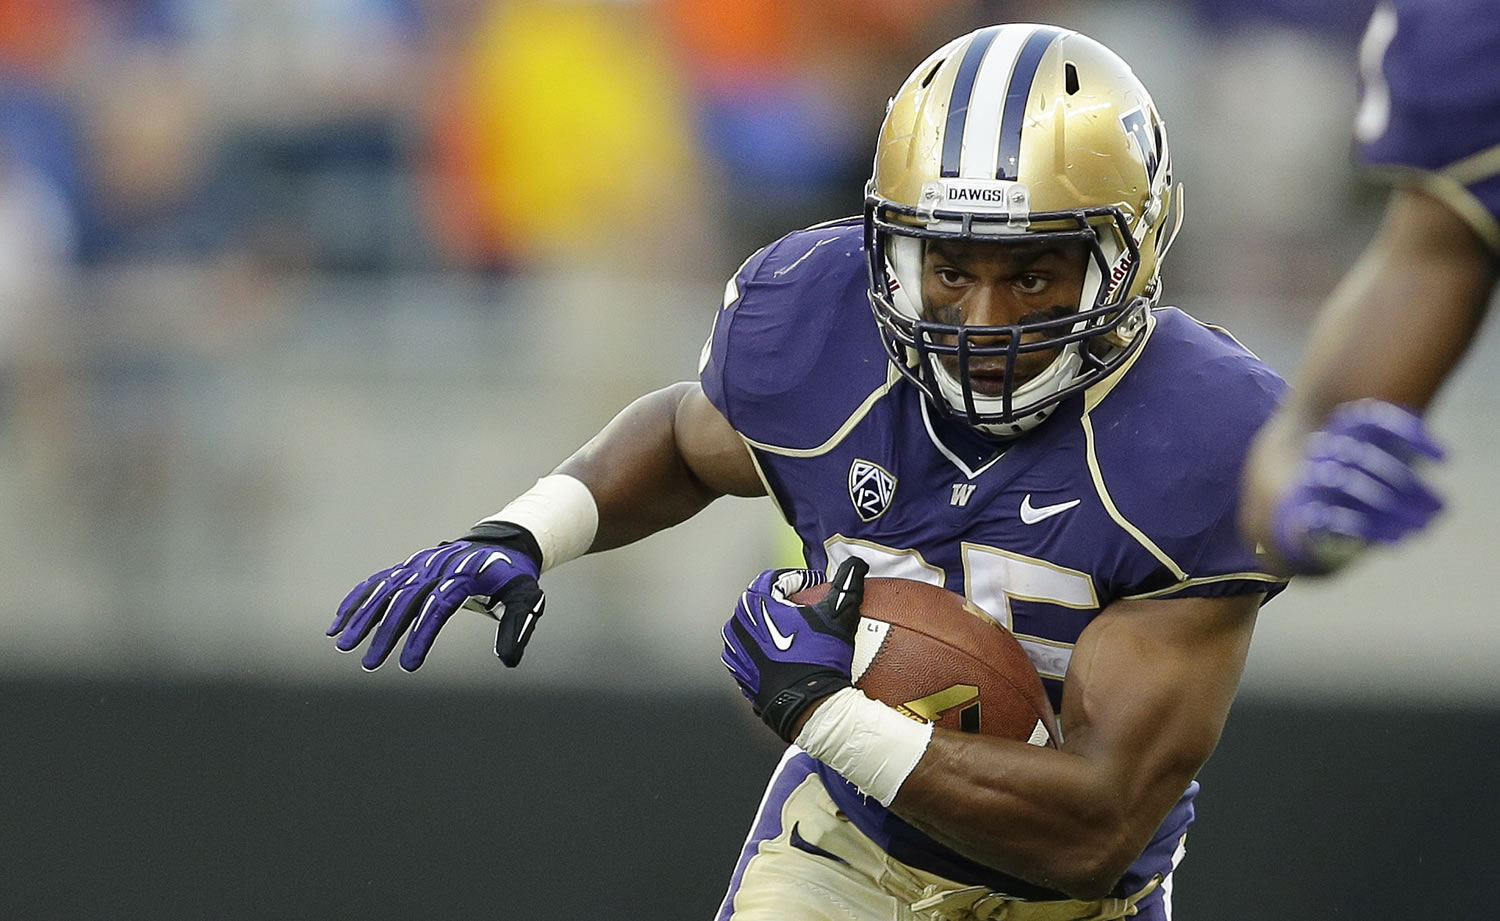 Washington's Bishop Sankey runs the ball against Boise State in the first half of a NCAA college football game, Saturday, Aug. 31, 2013, in Seattle. (AP Photo/Ted S.